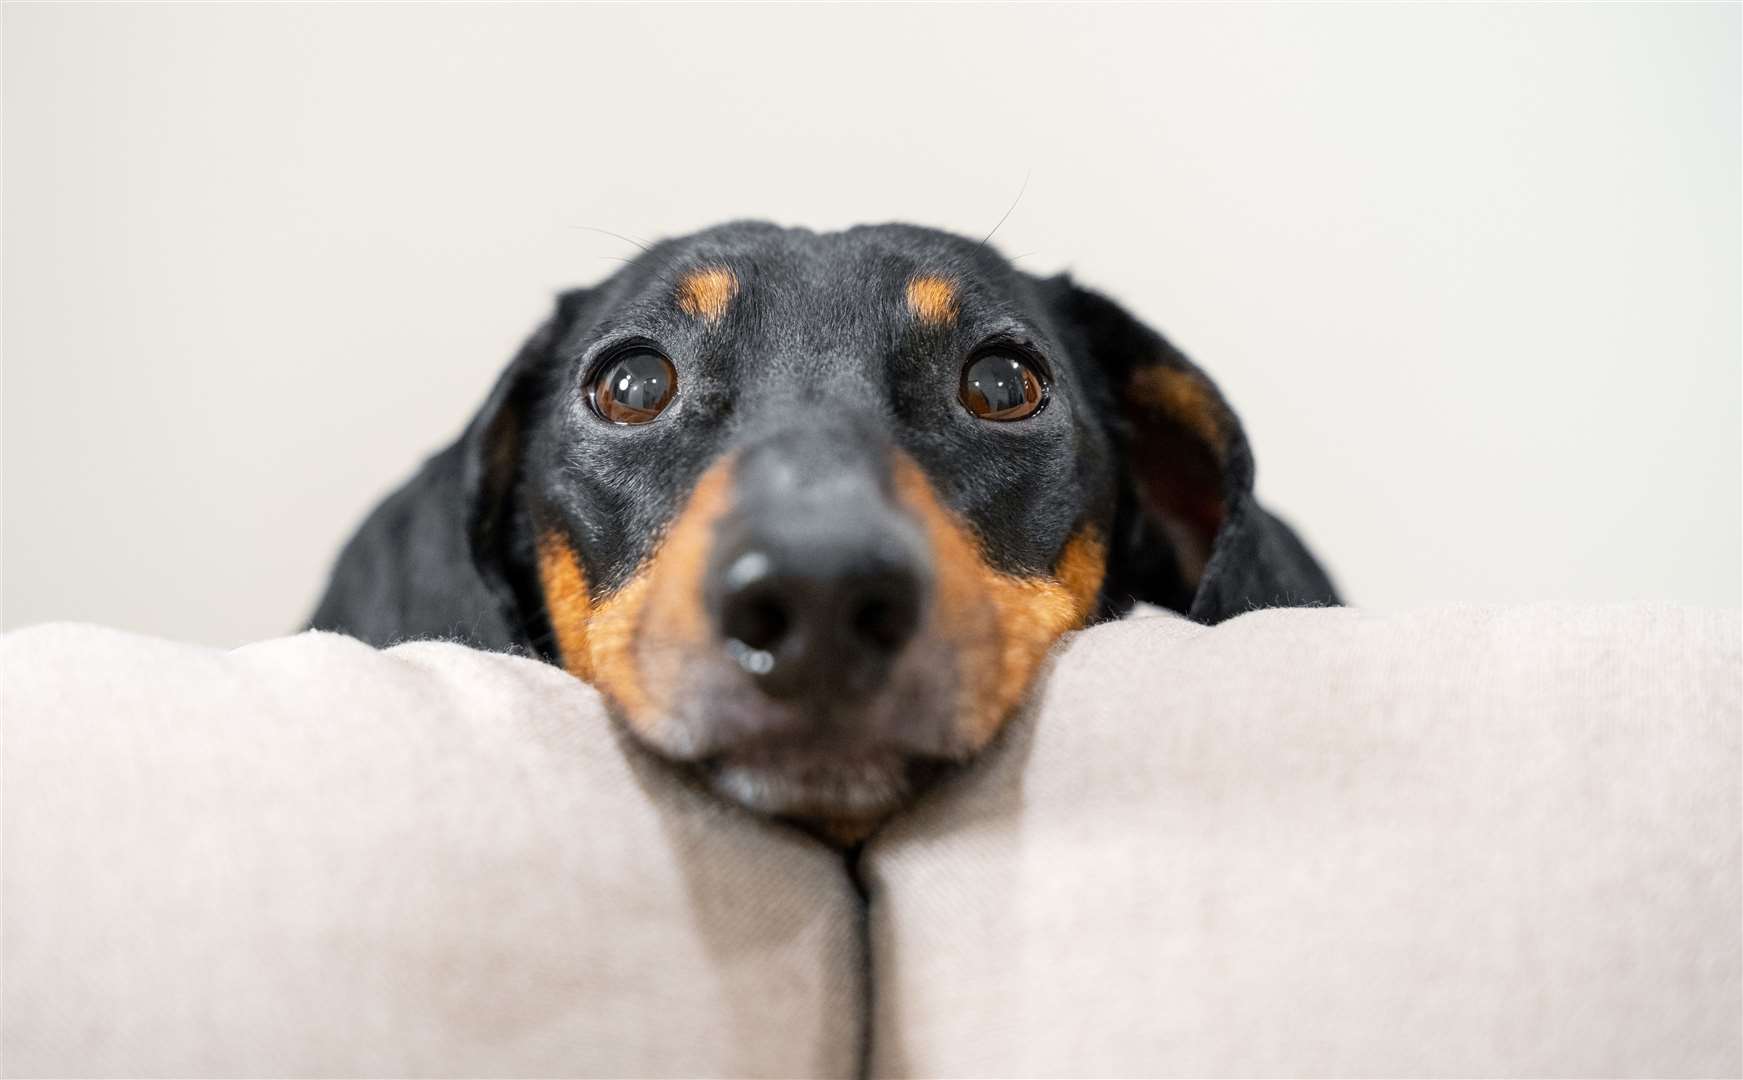 Does your dachshund have a mischievous streak? Image: iStock.